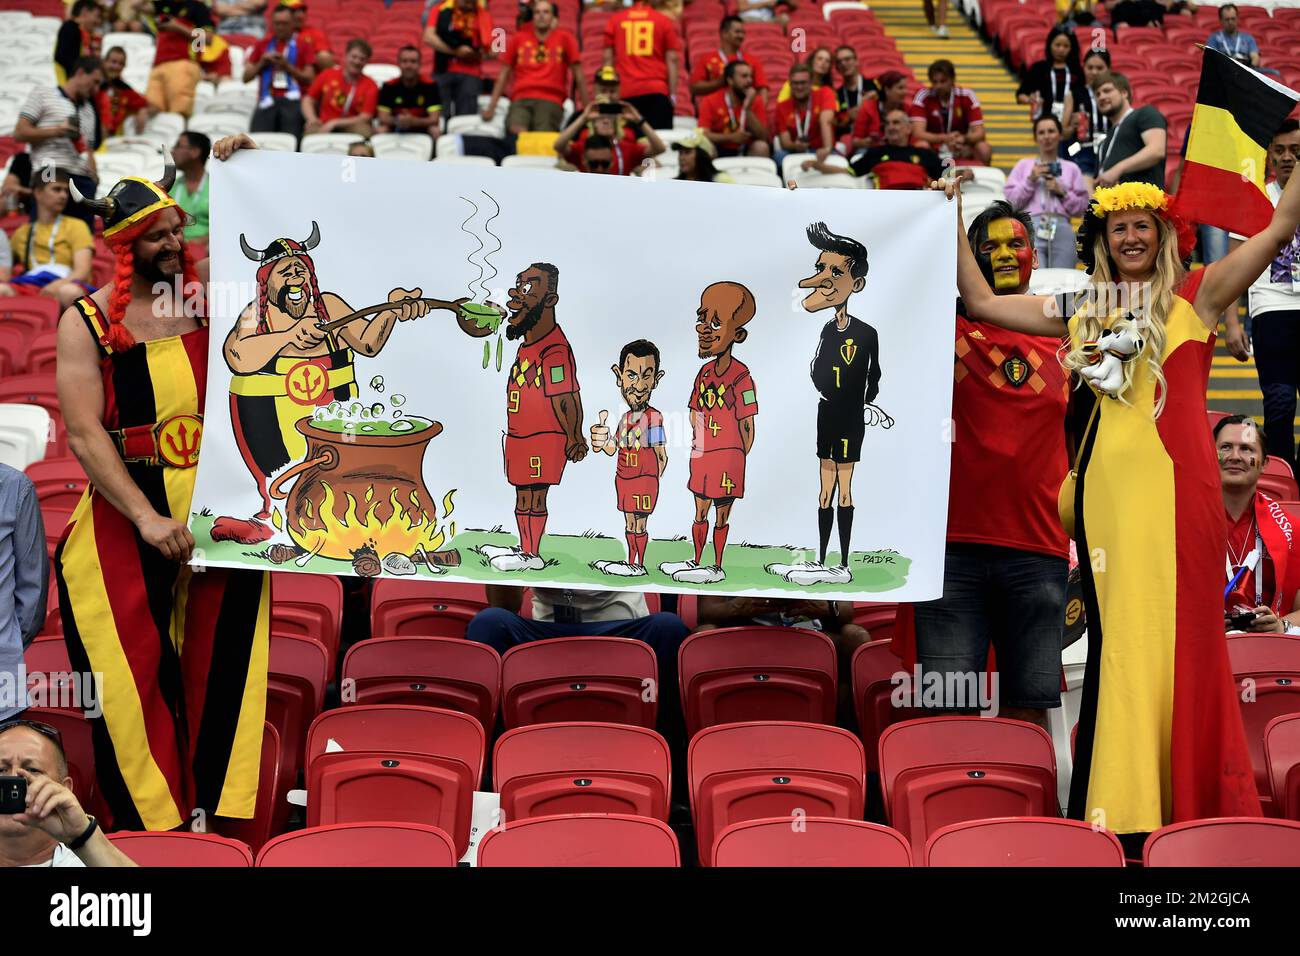 Red devils fan Obelgix Nicolas Dardenne holds a small tifo in the stands ahead of a soccer game between Belgian national soccer team the Red Devils and Brazil in Kazan, Russia, Friday 06 July 2018, the quarter-finals of the 2018 FIFA World Cup. BELGA PHOTO DIRK WAEM  Stock Photo